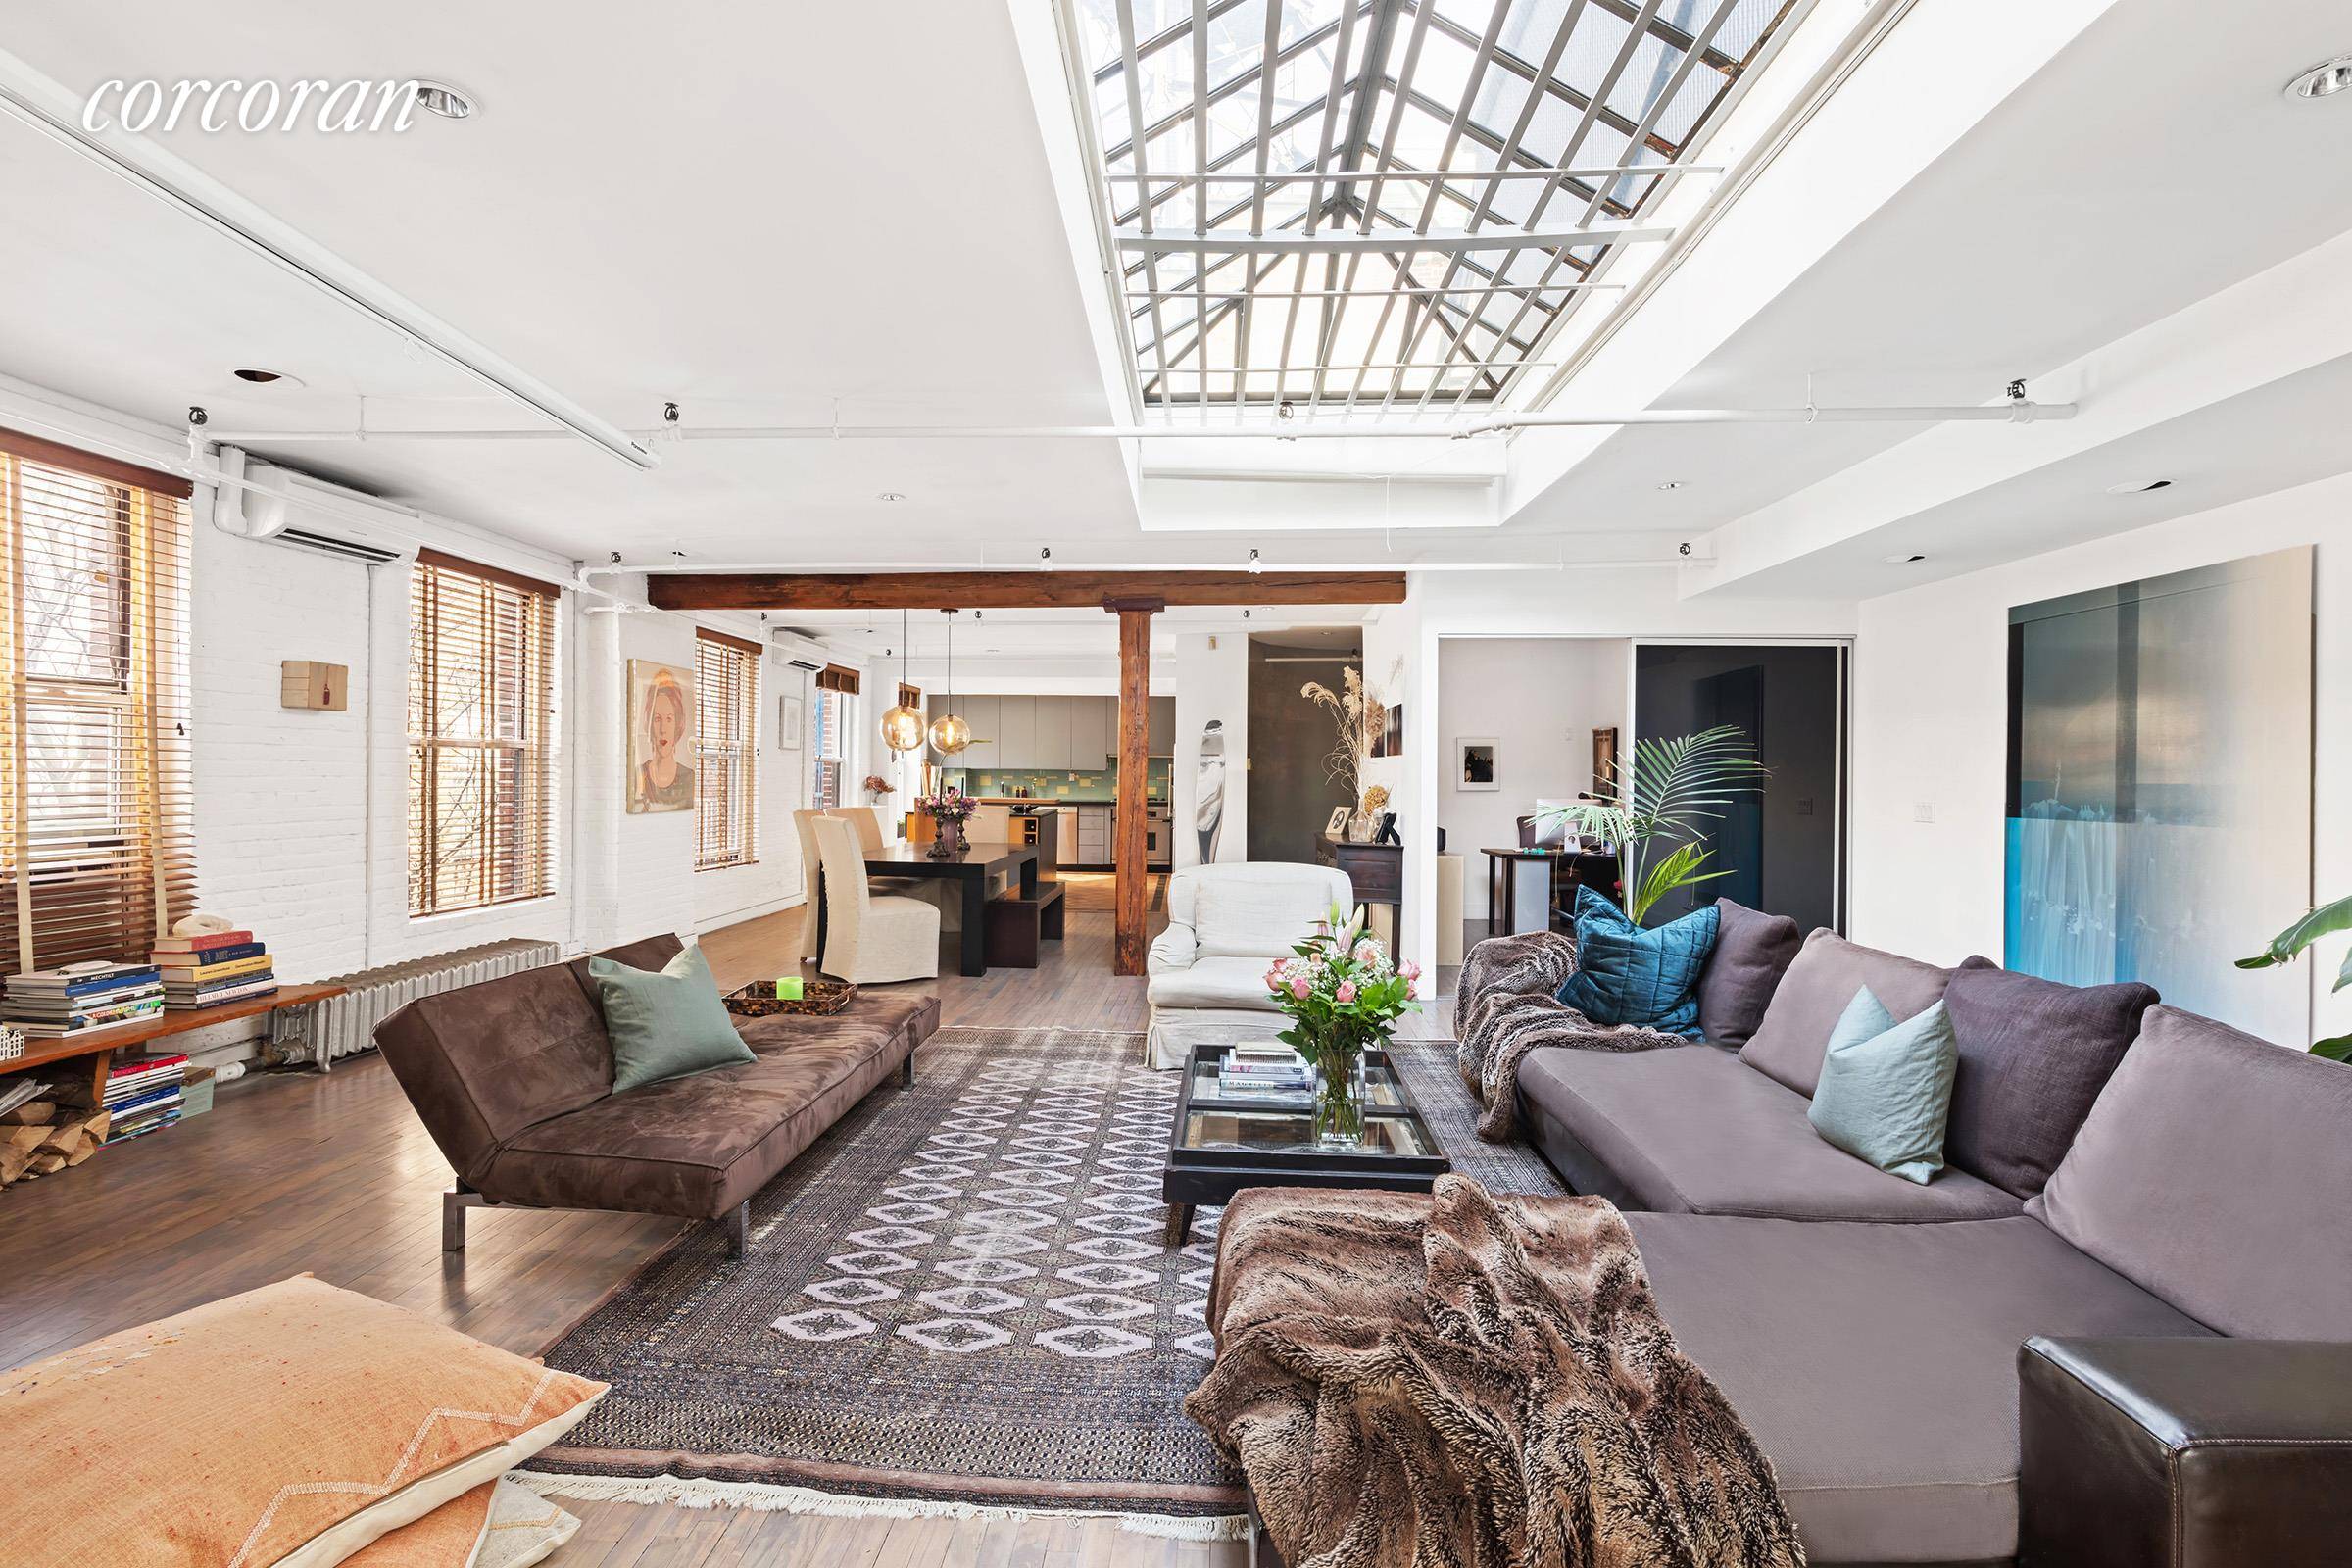 33 Bleecker Street, Apartment 6B, a spectacular bright, airy and quiet 3 Bed 3 Bath, 2600 SF Loft, is located on the top floor of this boutique prewar co op ...